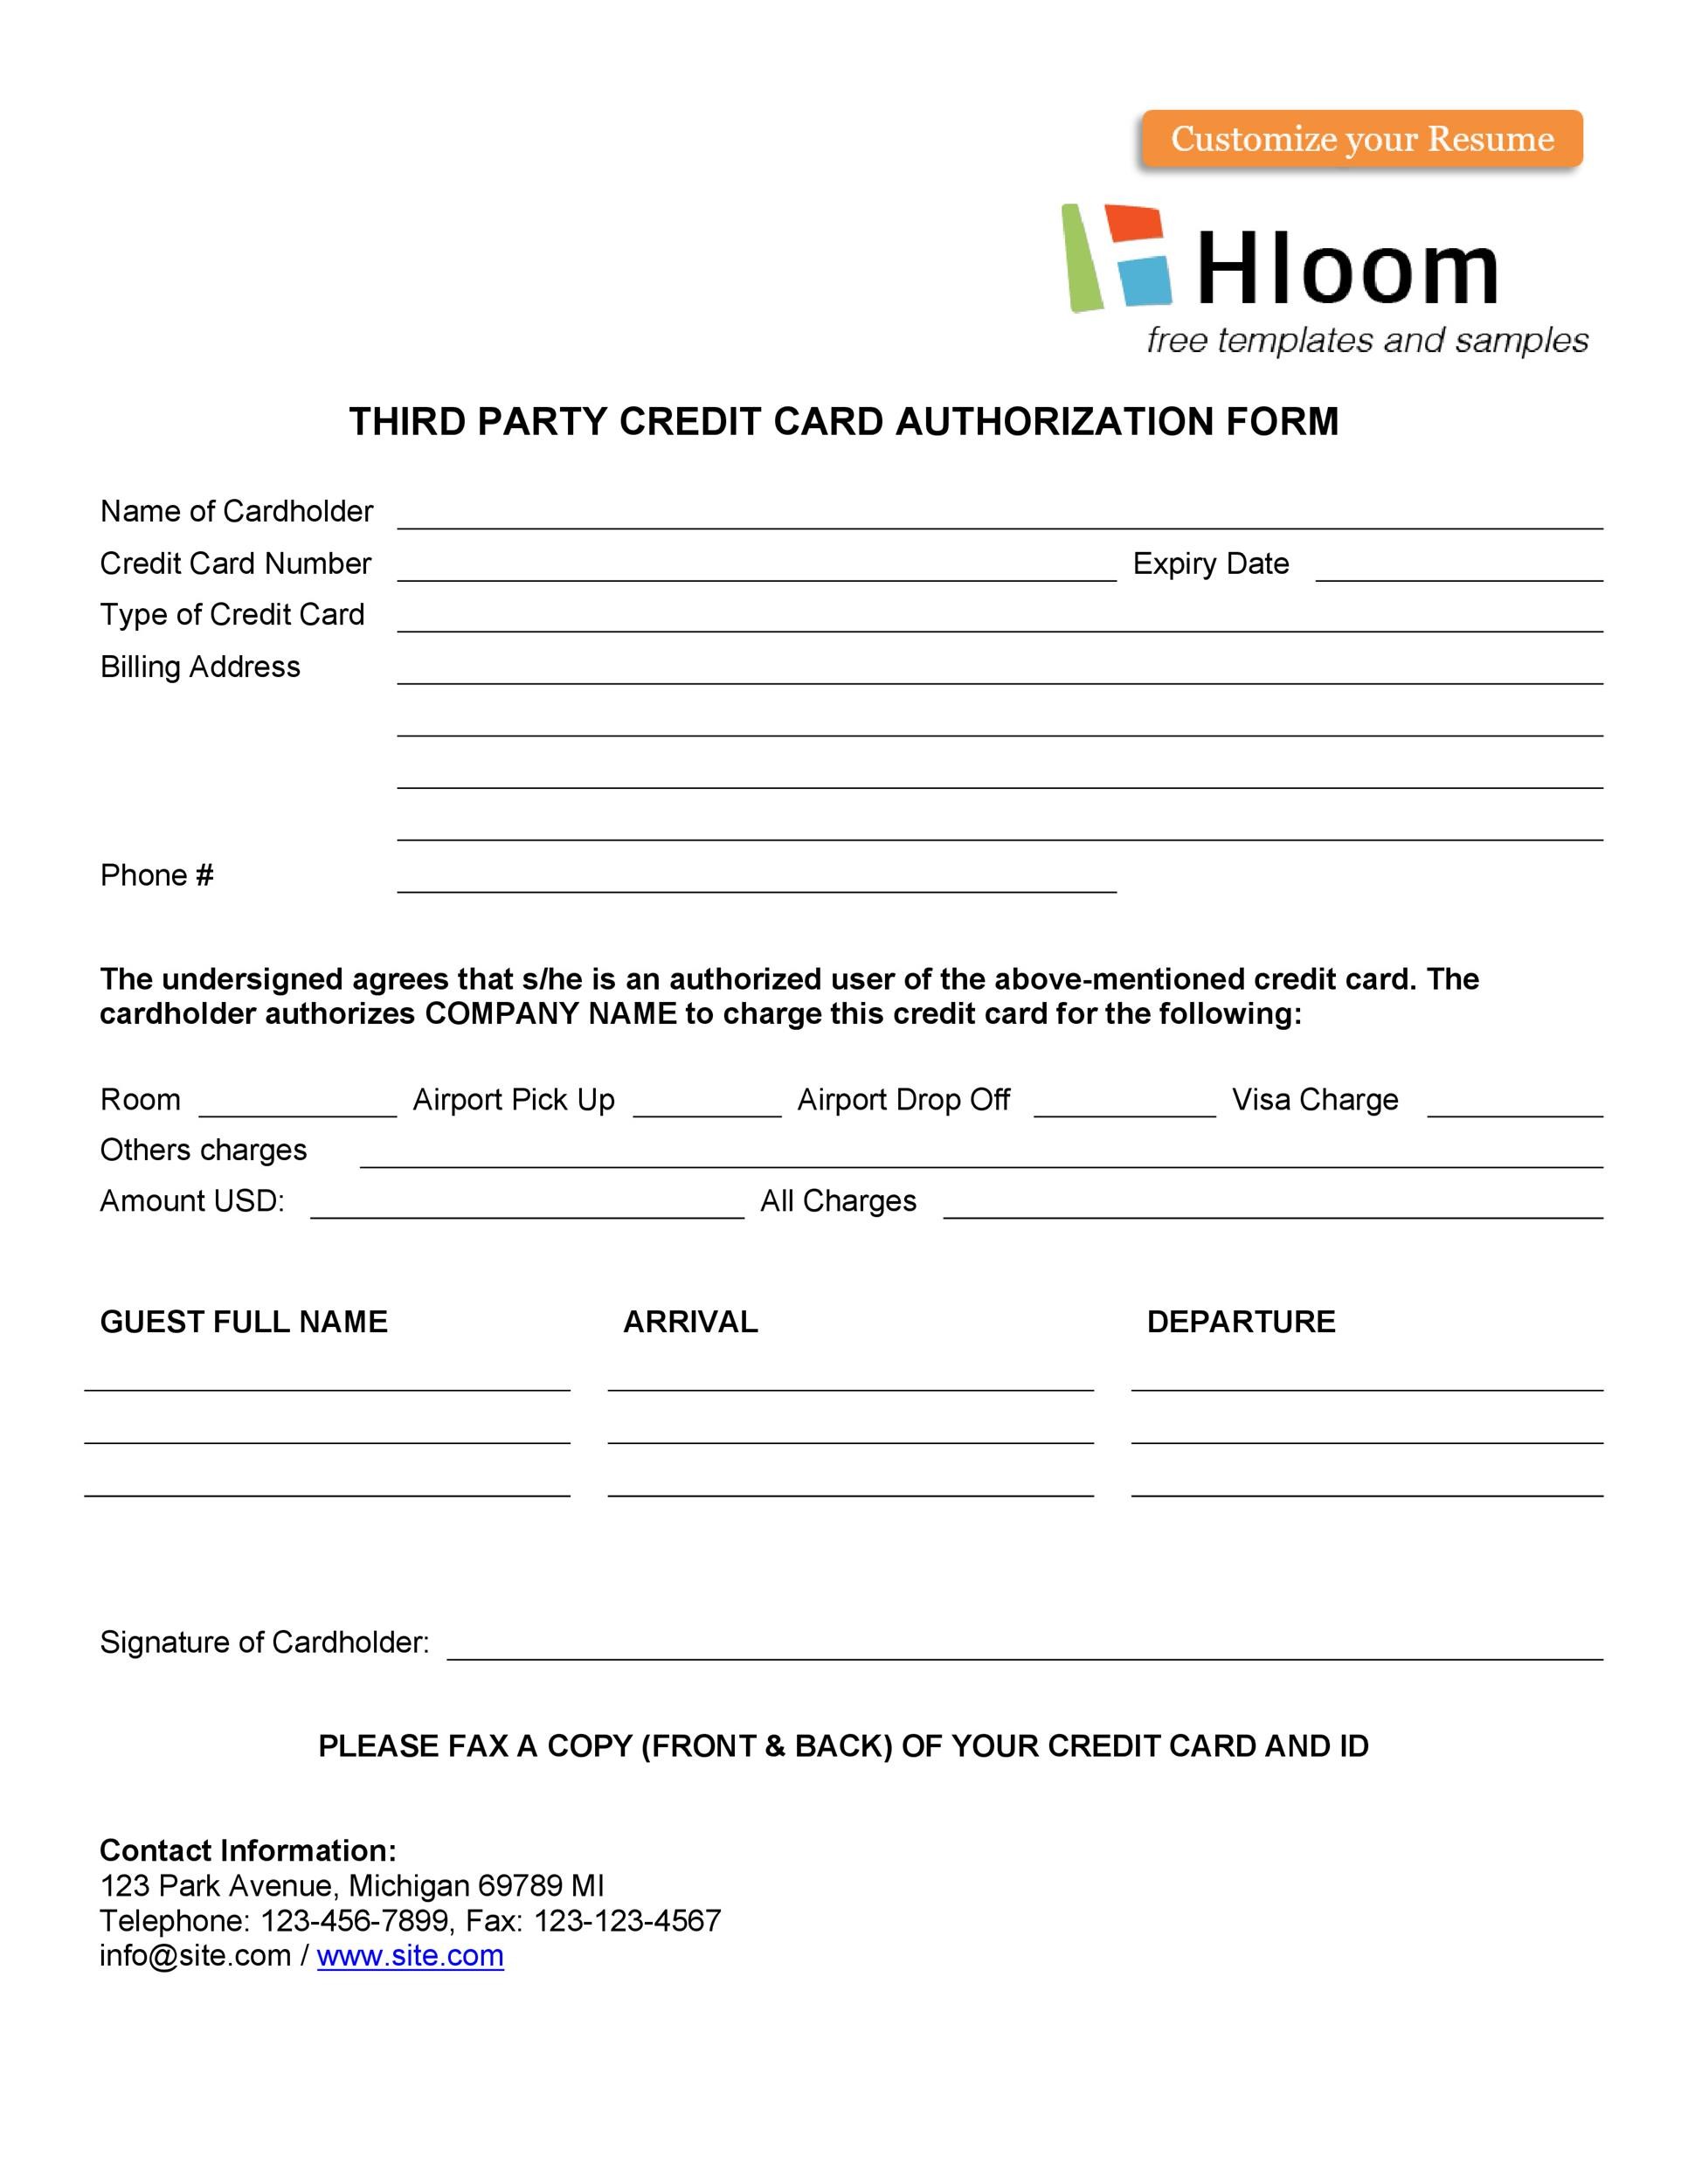 41 Credit Card Authorization Forms Templates {ReadytoUse}